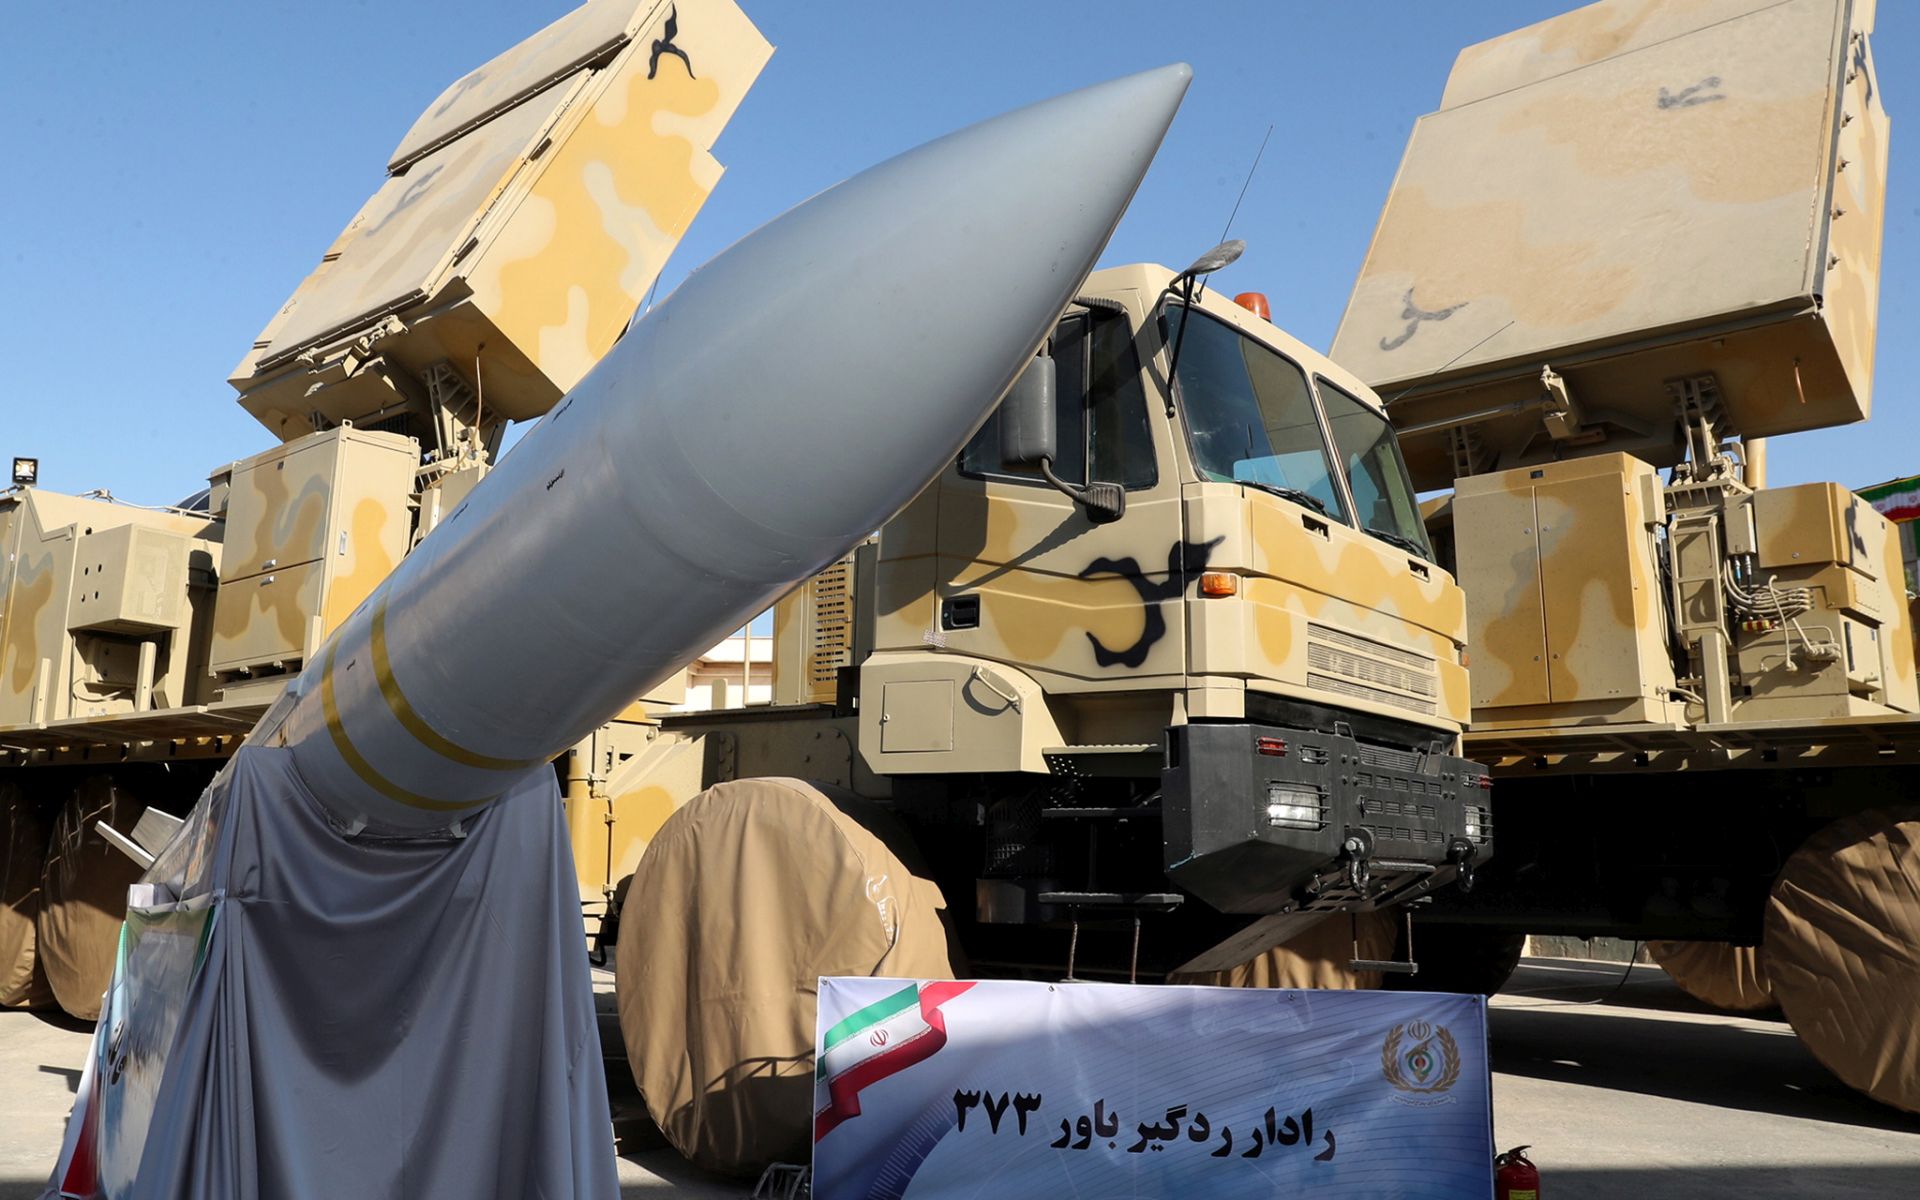 epa07785233 A handout picture made available by Iran's Presidential Office shows Iran's domestically built air defense missile system Bavar-373 (Believe), a long-range surface-to-air missile system, unveiled during a ceremony in Tehran, Iran, 22 August 2019. Iranian President Rouhani ordered the Bavar-373 missile defense system to be added to the country's network of air defense, media reported.  EPA/IRANIAN PRESIDENCY OFFICE HANDOUT  HANDOUT EDITORIAL USE ONLY/NO SALES